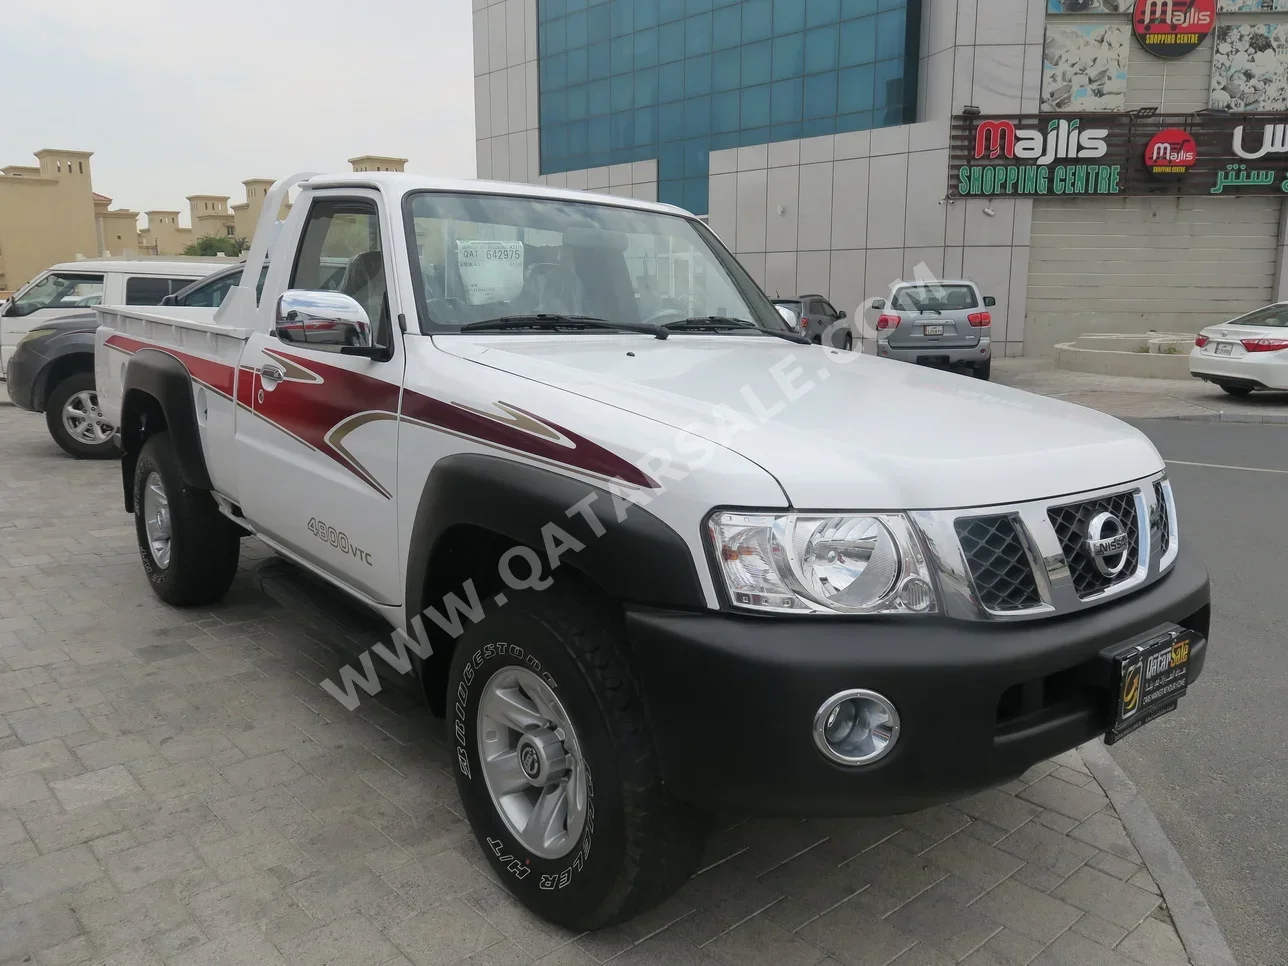 Nissan  Patrol  Pickup  2022  Manual  0 Km  6 Cylinder  Four Wheel Drive (4WD)  Pick Up  White  With Warranty